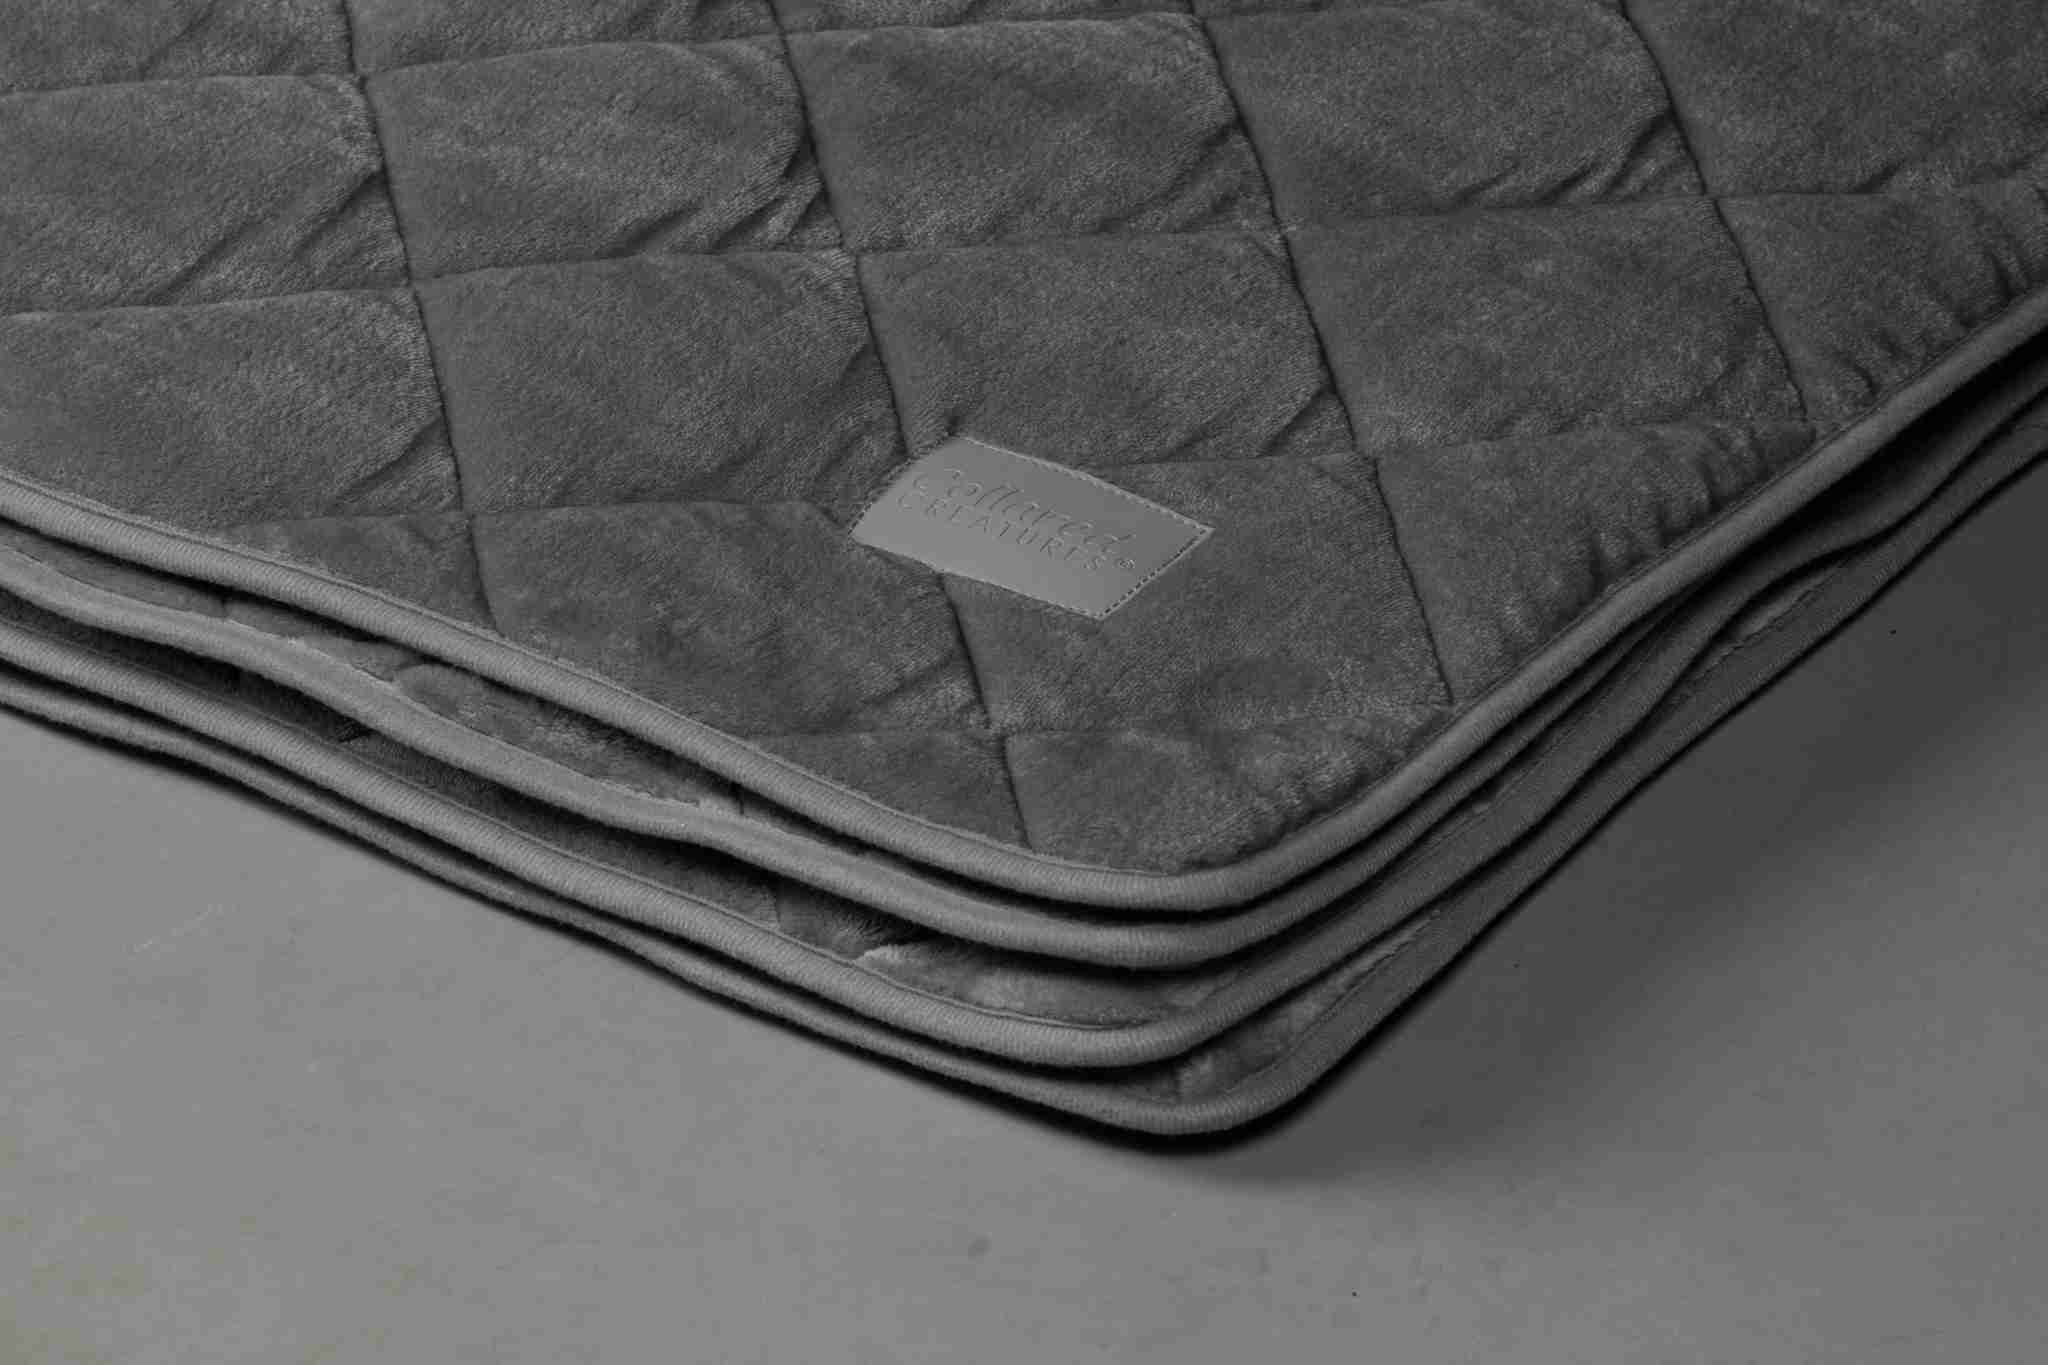 Collared Creatures Luxury Quilted Dog Blanket-Throw Grey